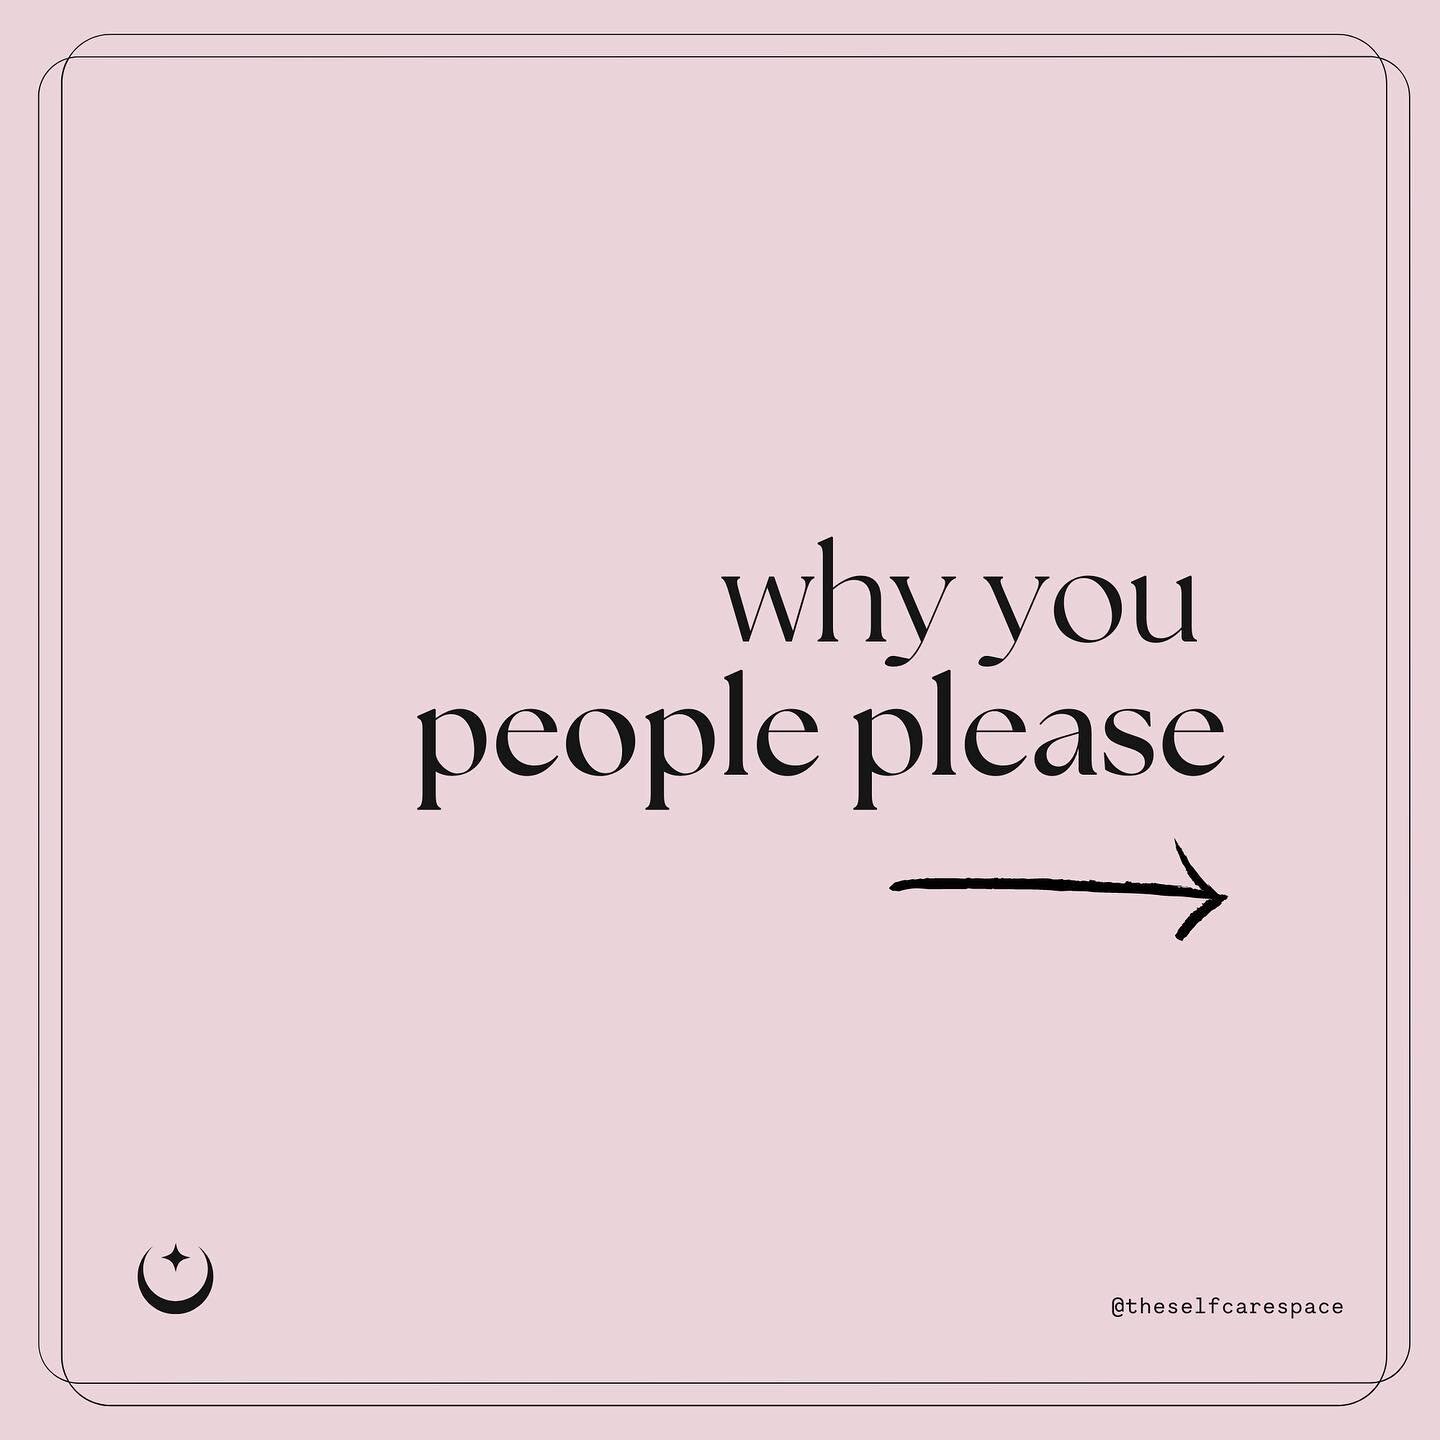 Do you find yourself always trying to make others happy, often at the expense of your own needs and desires? 

You may identify as a people pleaser. But why do you do it? 

Perhaps it&rsquo;s because you want to be liked, or because you feel responsi